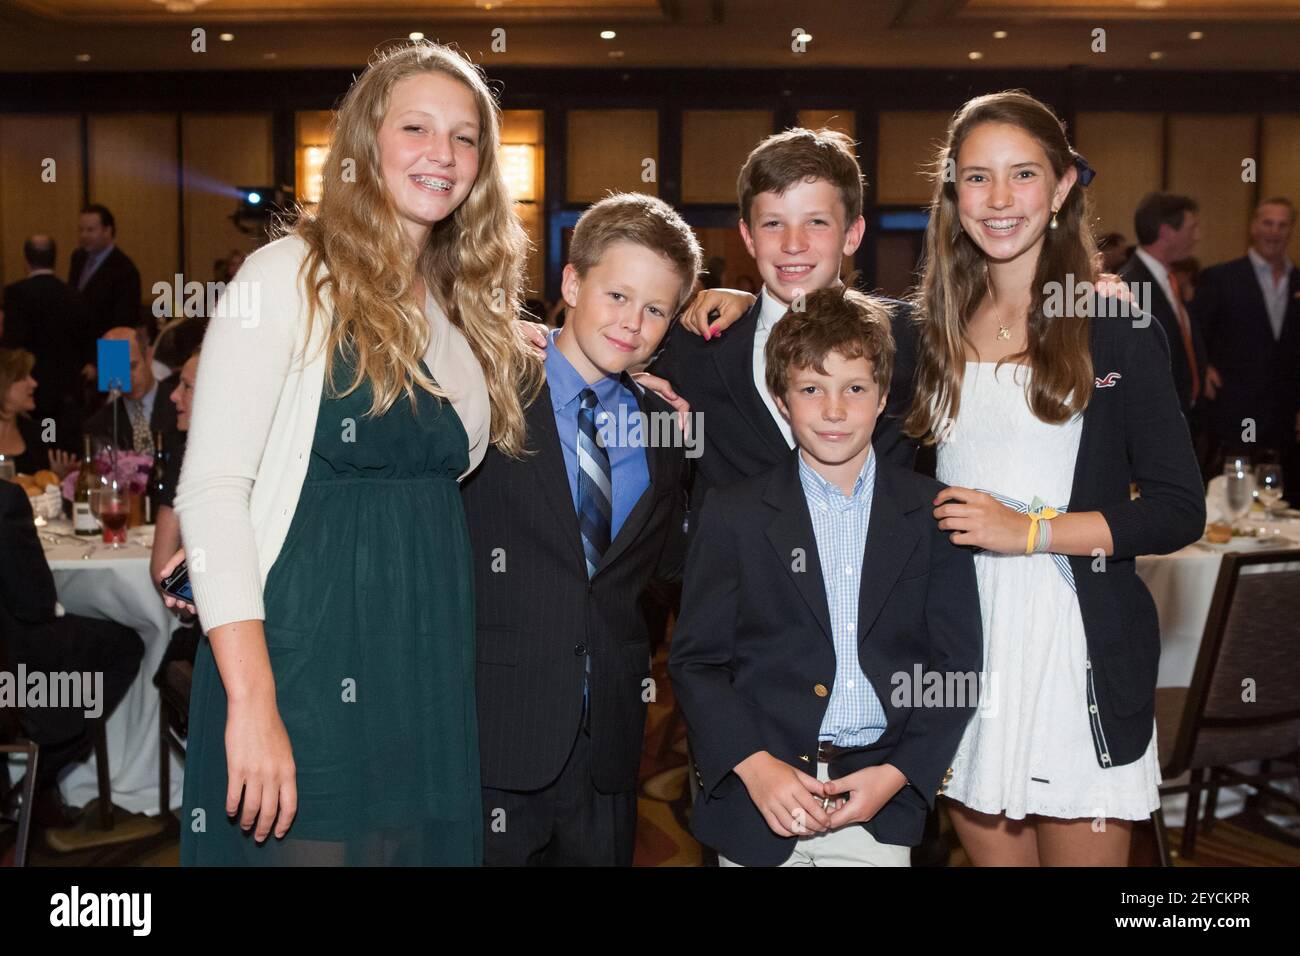 McRae Fried, Ben Weisler, Eli Fried, Max Fried, Jessie Kaull - Boys & Girls  Clubs of San Francisco's Annual Gala: Inspiring Healthy Futures held at  Westin St. Francis, Union Square, San Francisco